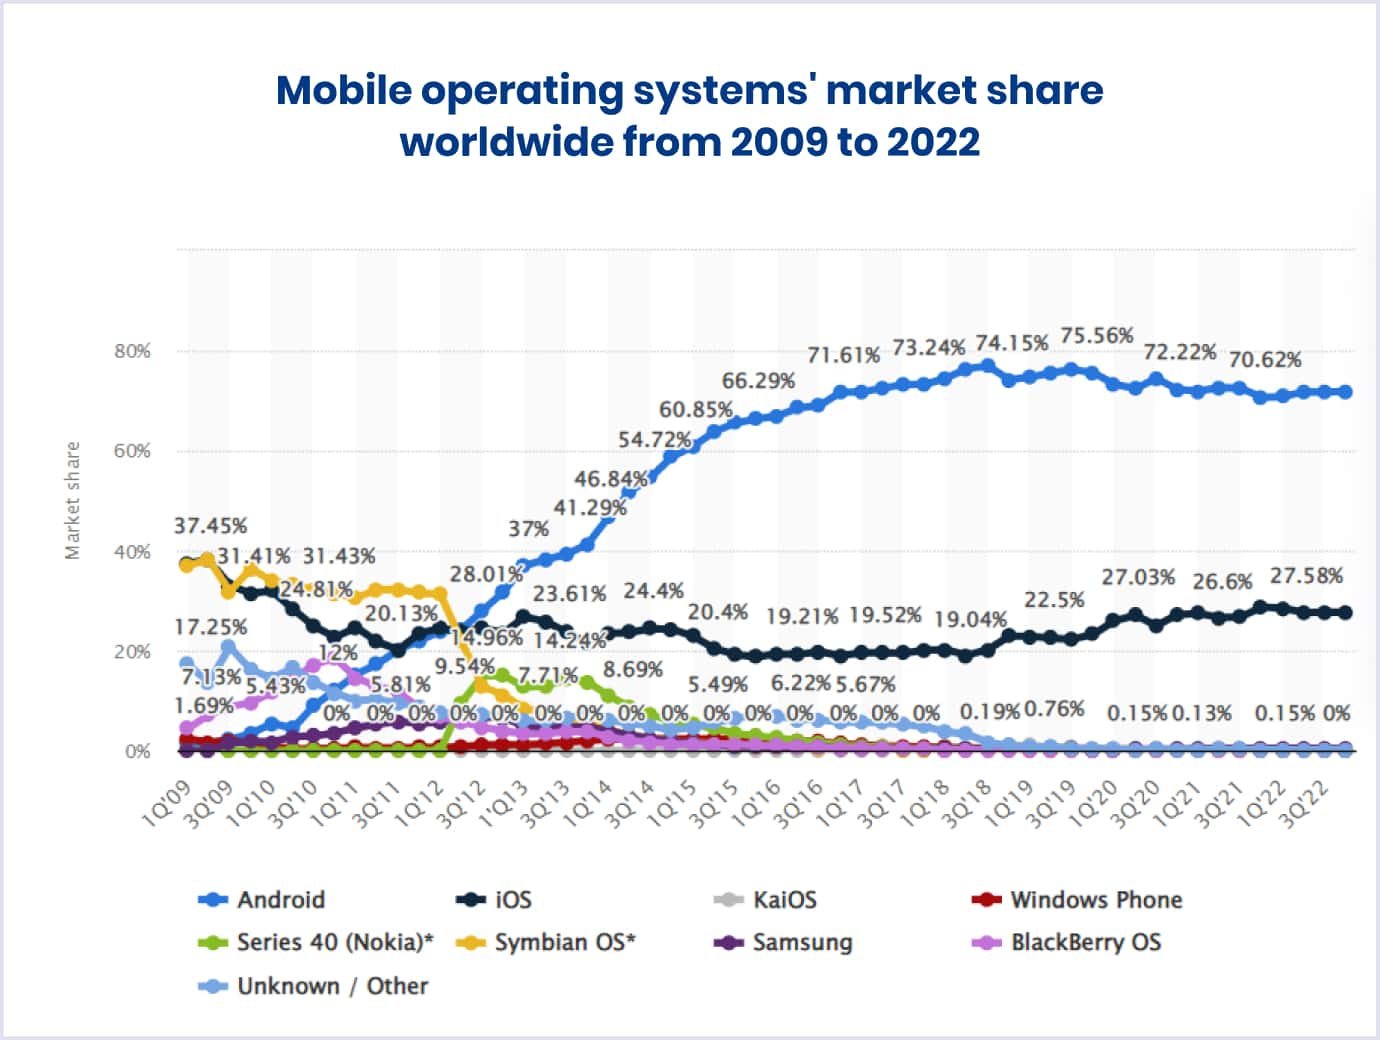 Mobile operating systems' market share worldwide